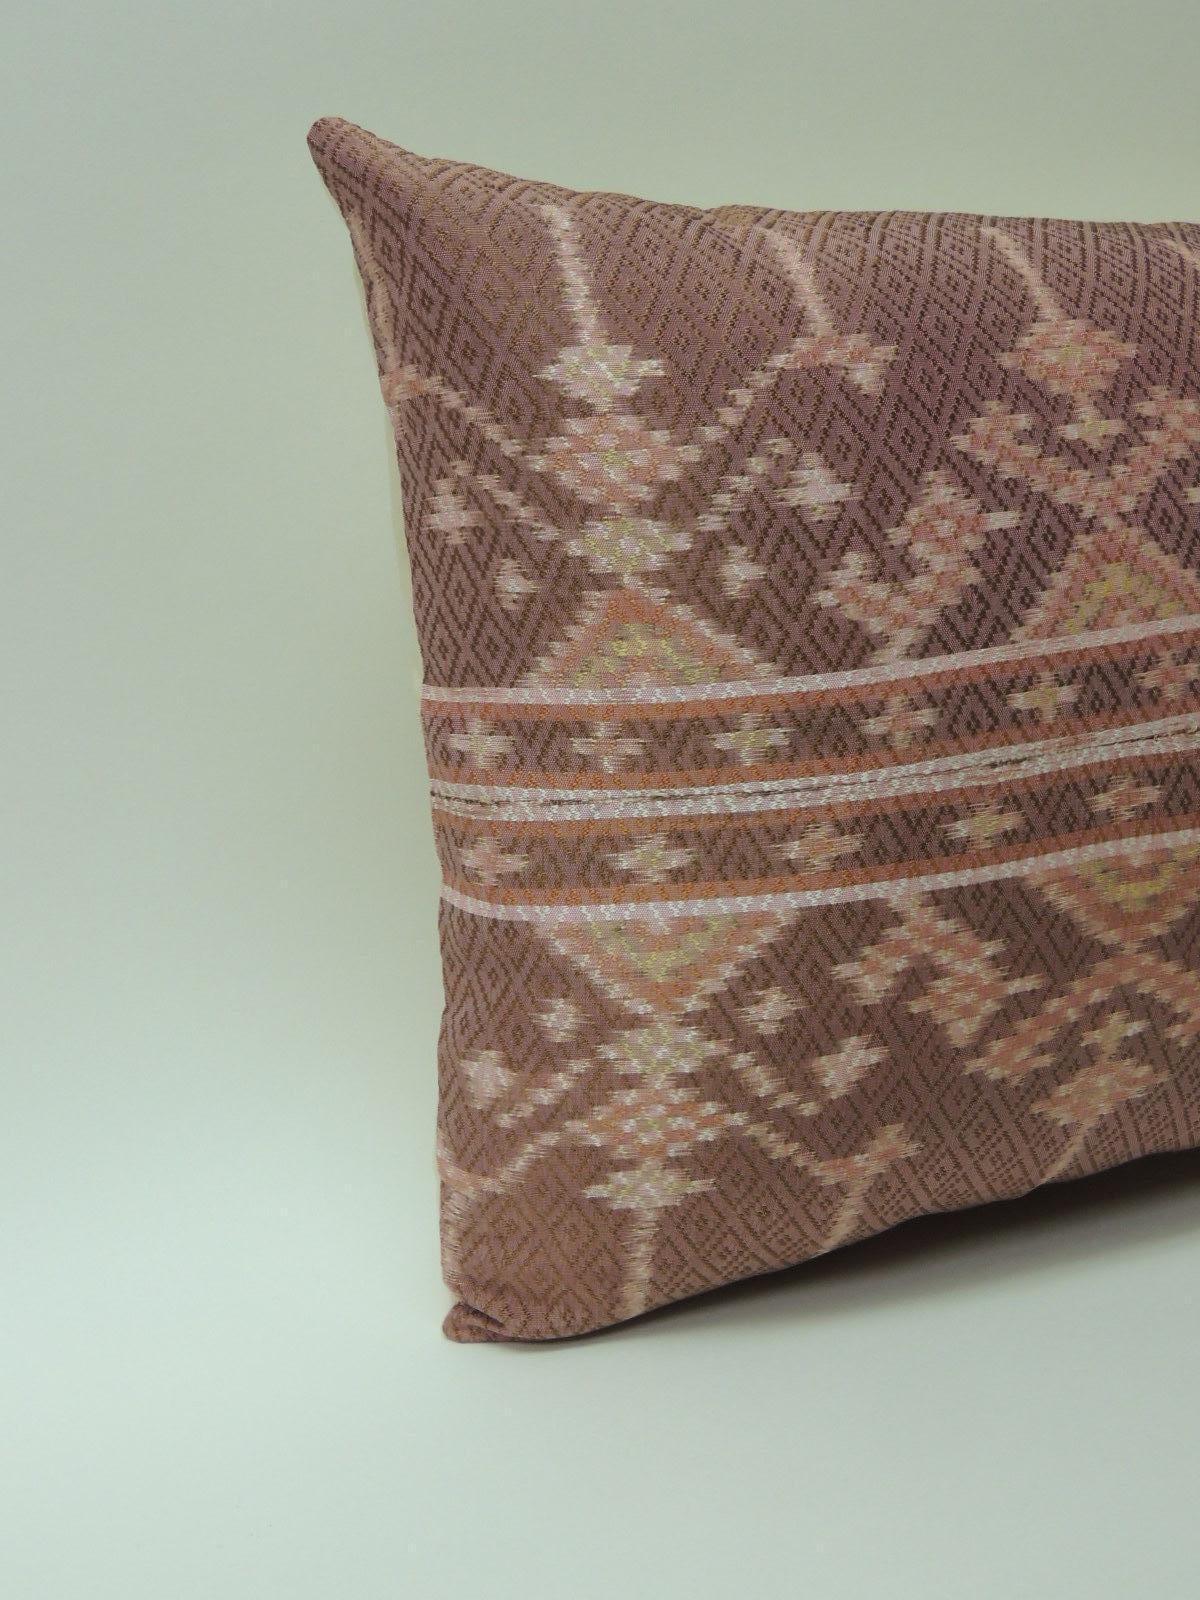 Vintage woven pink silk Ikat decorative lumbar pillow
Vintage silk Ikat woven textile decorative lumbar pillow. Traditional Asian woven pink textile with tribal design in the front panel. Decorative lumbar pillow finished with ecru silk backing.